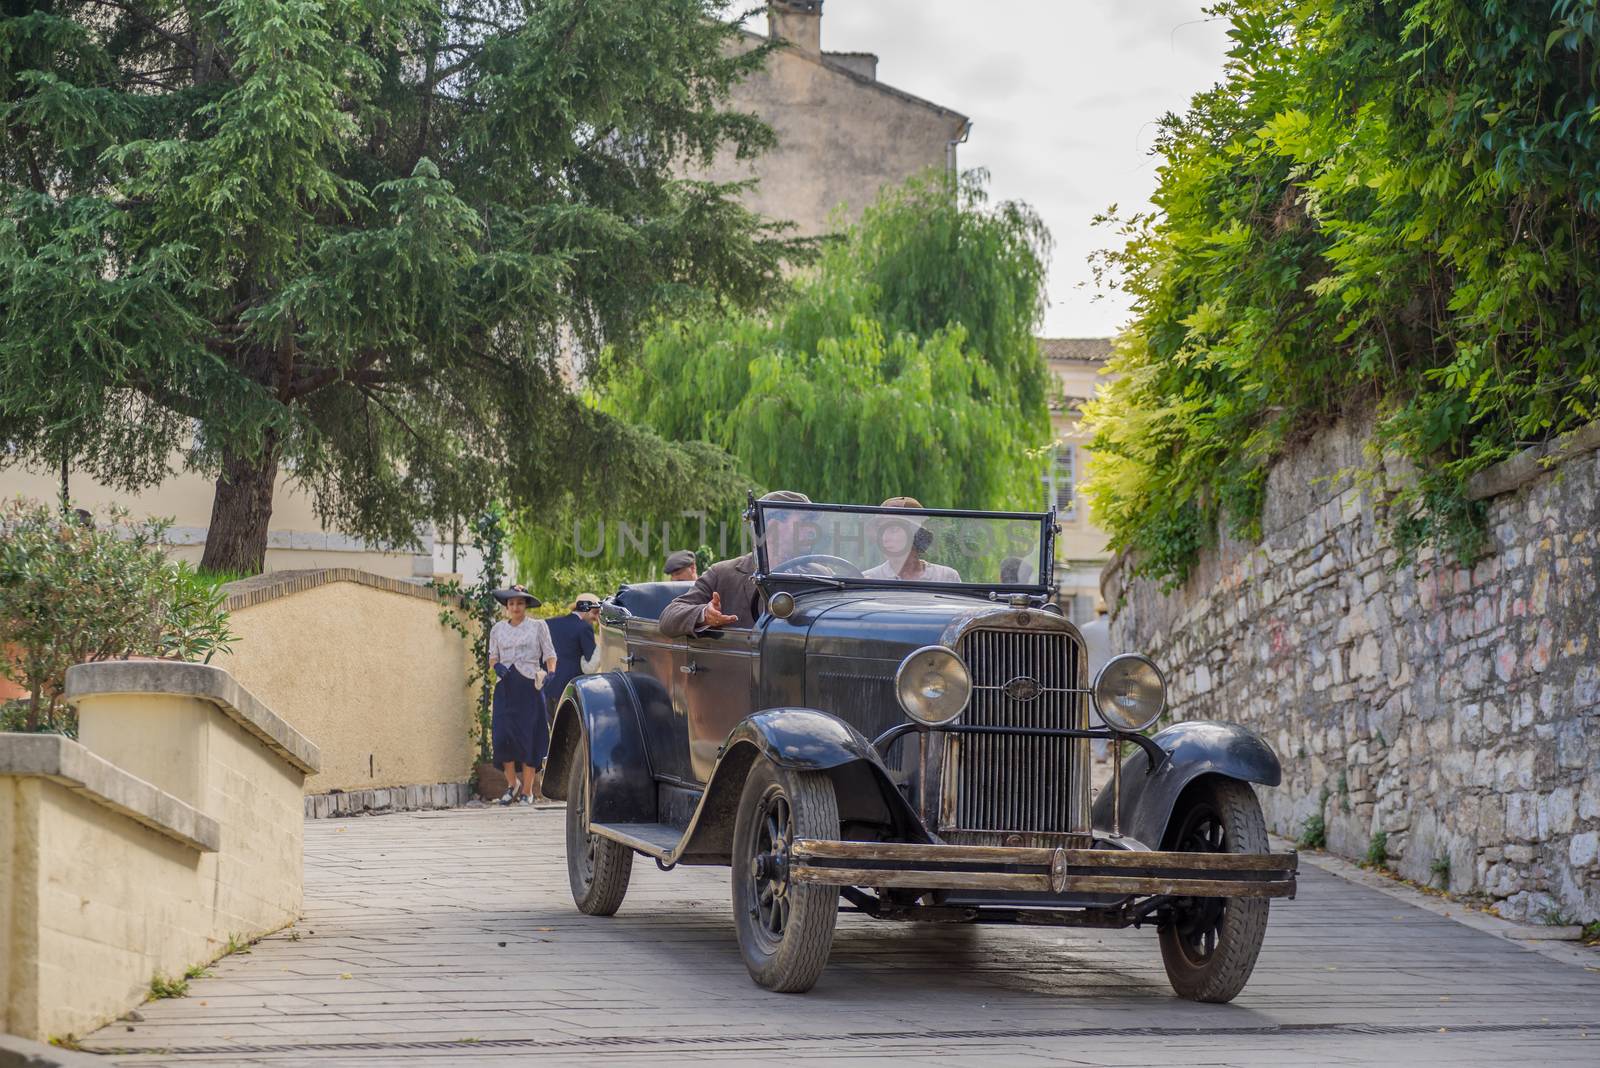 The Durrells: October 20, 2015. Filming of the Durrels TV series in Corfu island Greece  staring Alexis Georgoulis and Keeley Hawes  